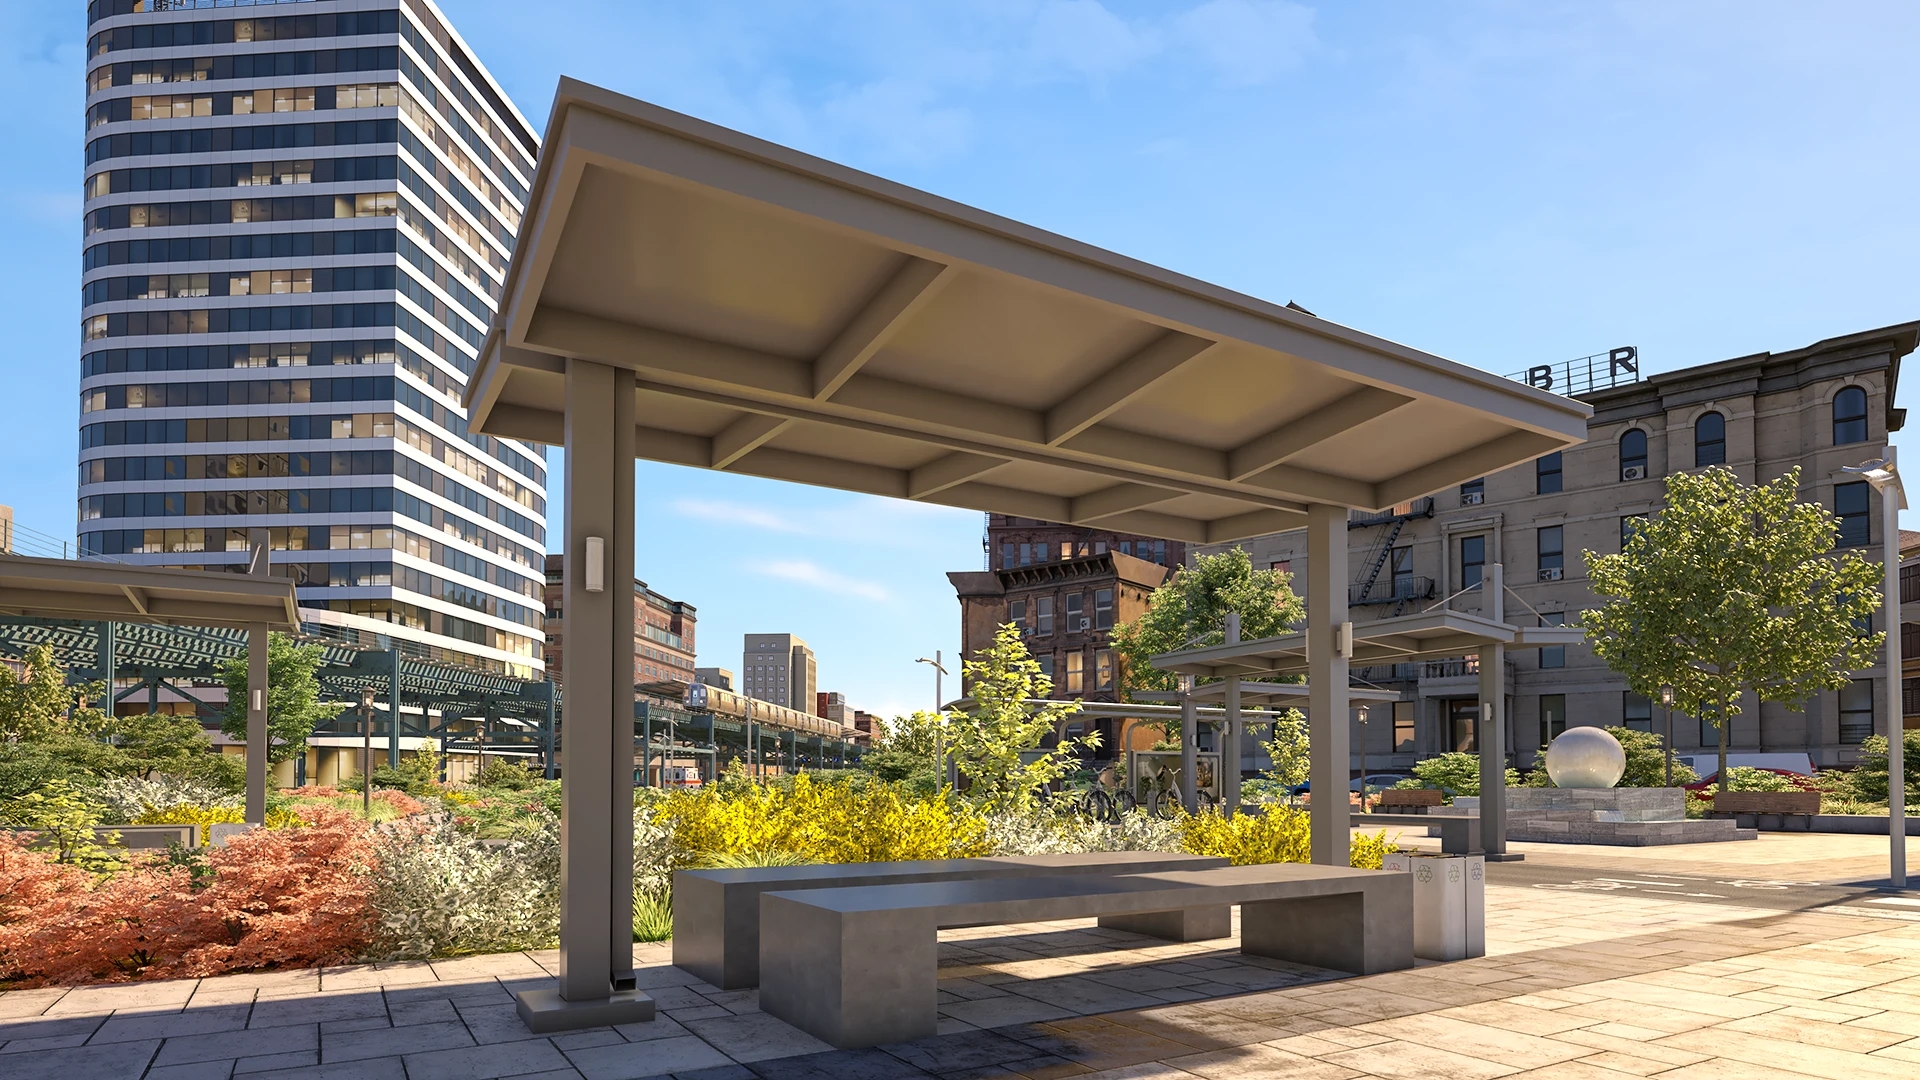 Umbra SRC freestanding architectural canopy in a park